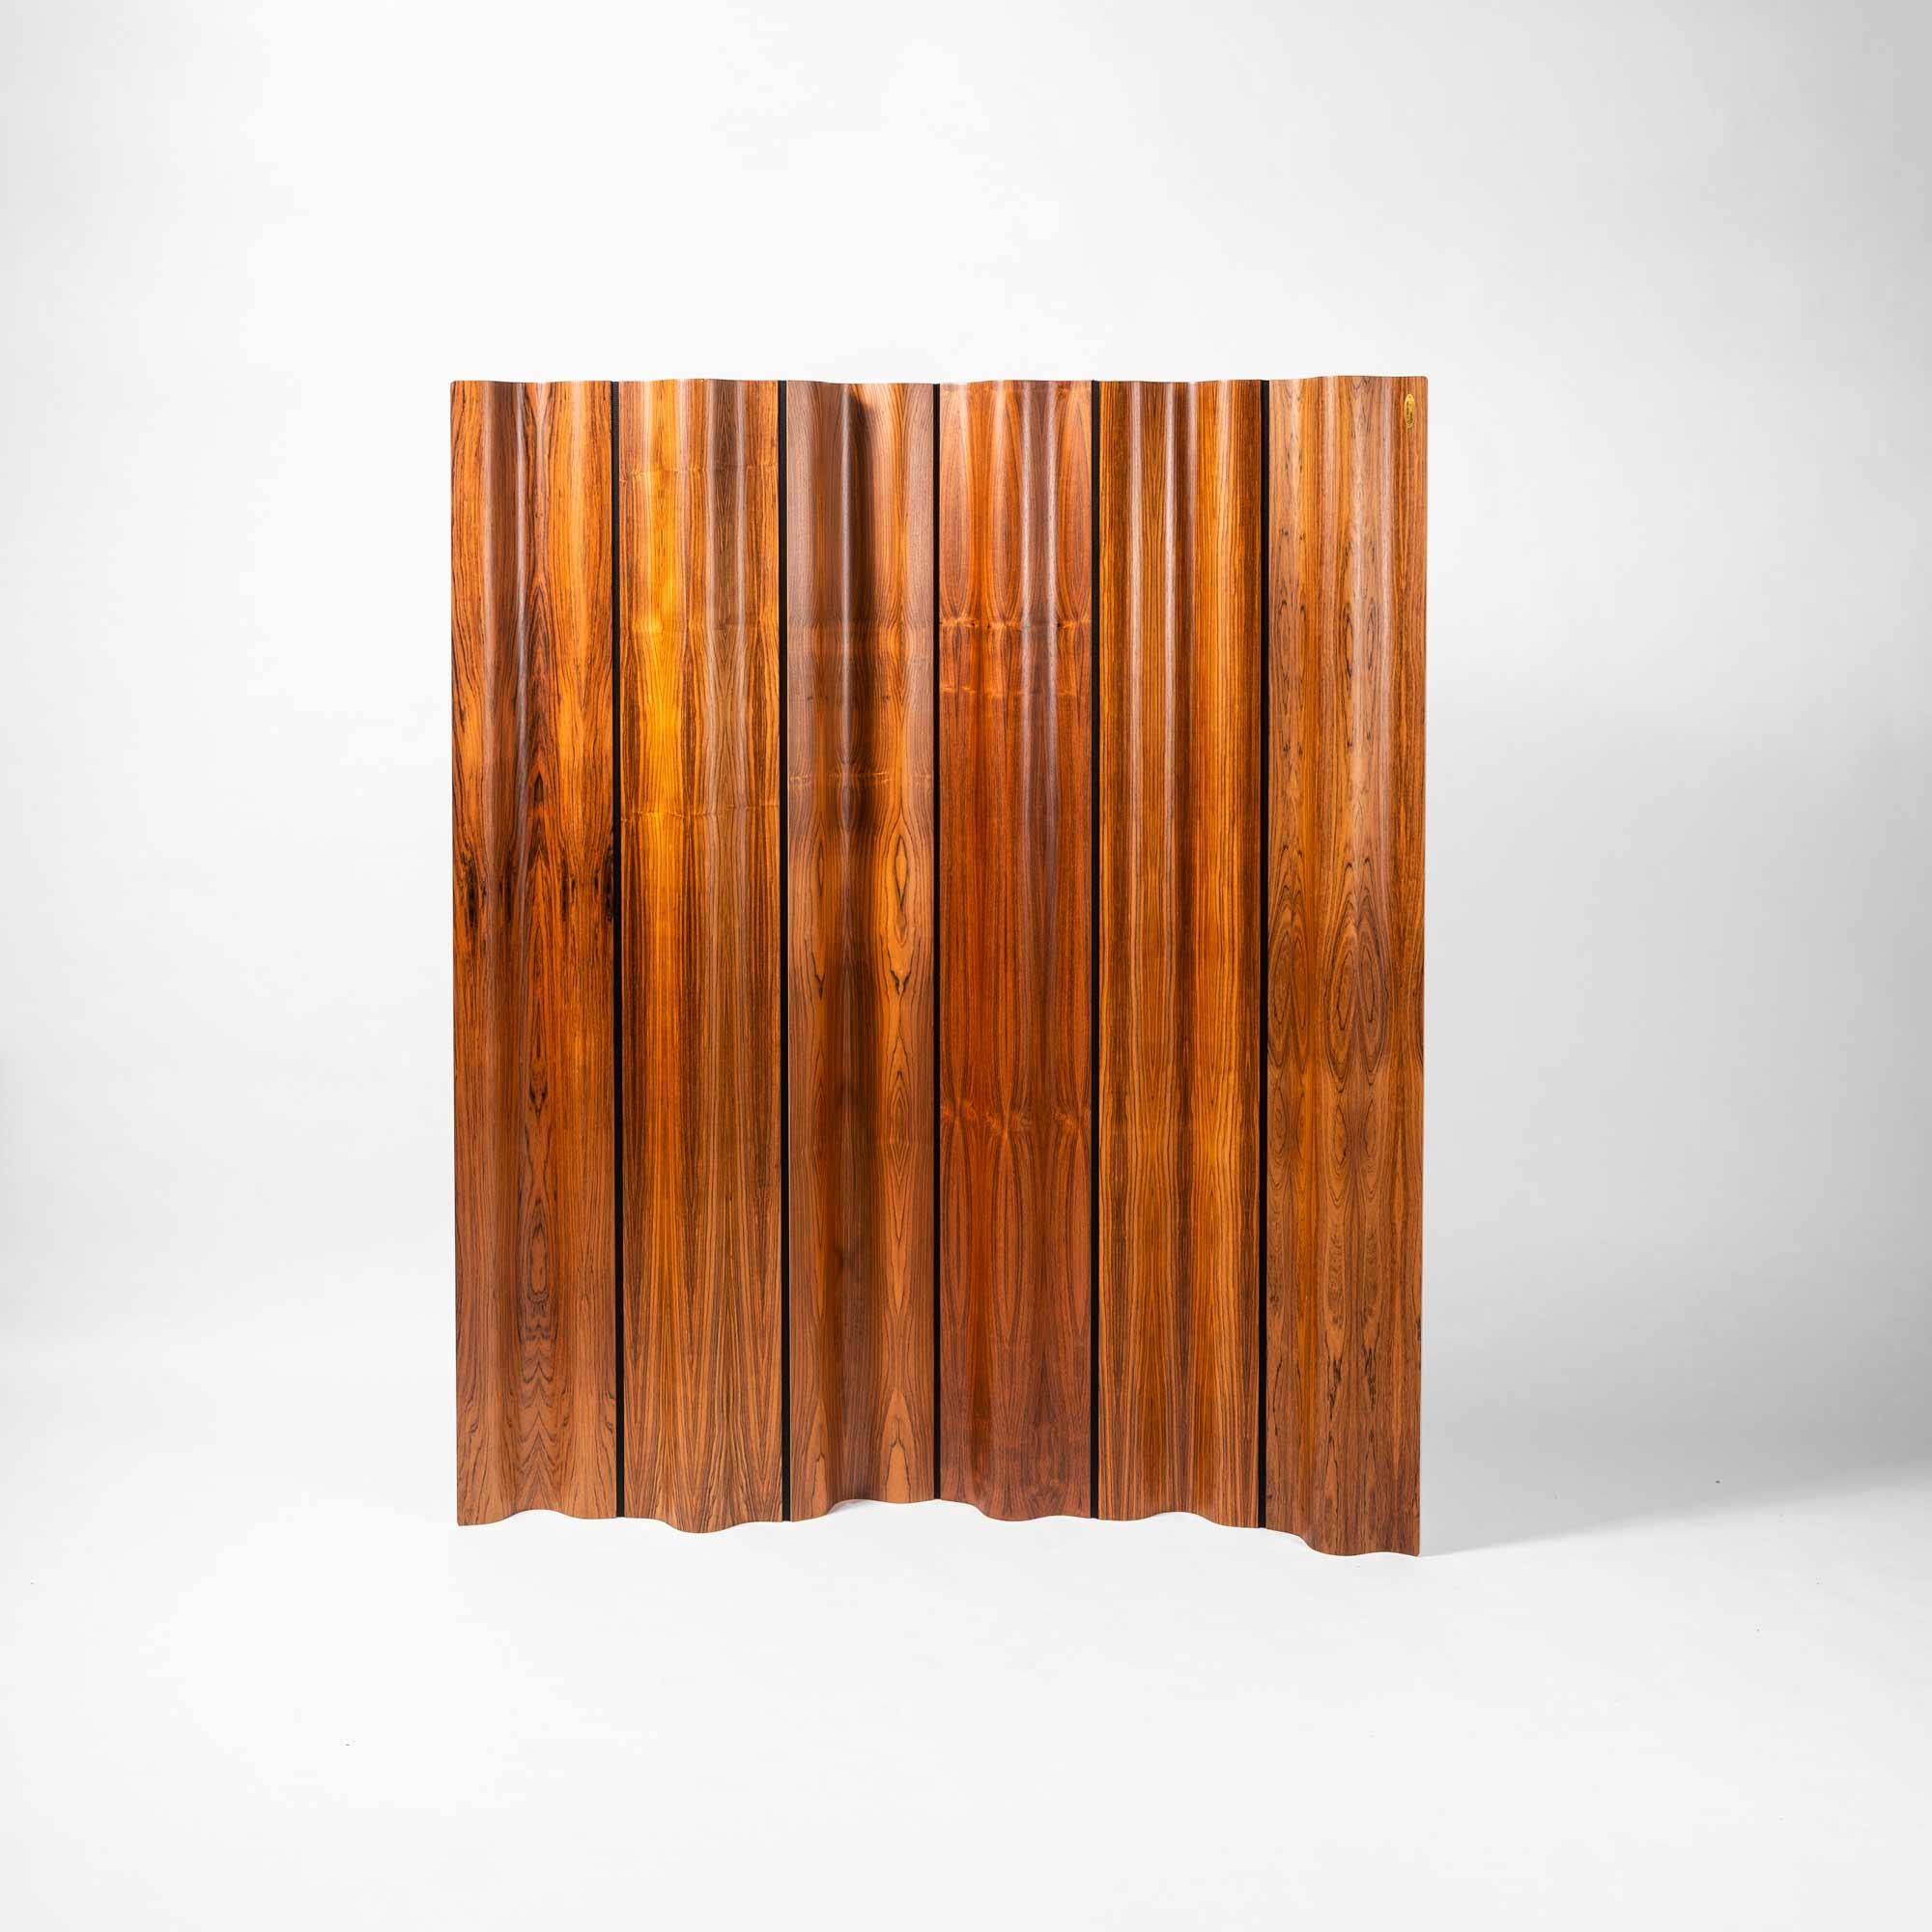 Limited edition of the Eames folding screen (FSW-6) in rosewood, numbered 155/500. The design of the screen was a clever combination of molded plywood panels and a flexible cotton canvas band in between each. The panels were shaped to the same exact